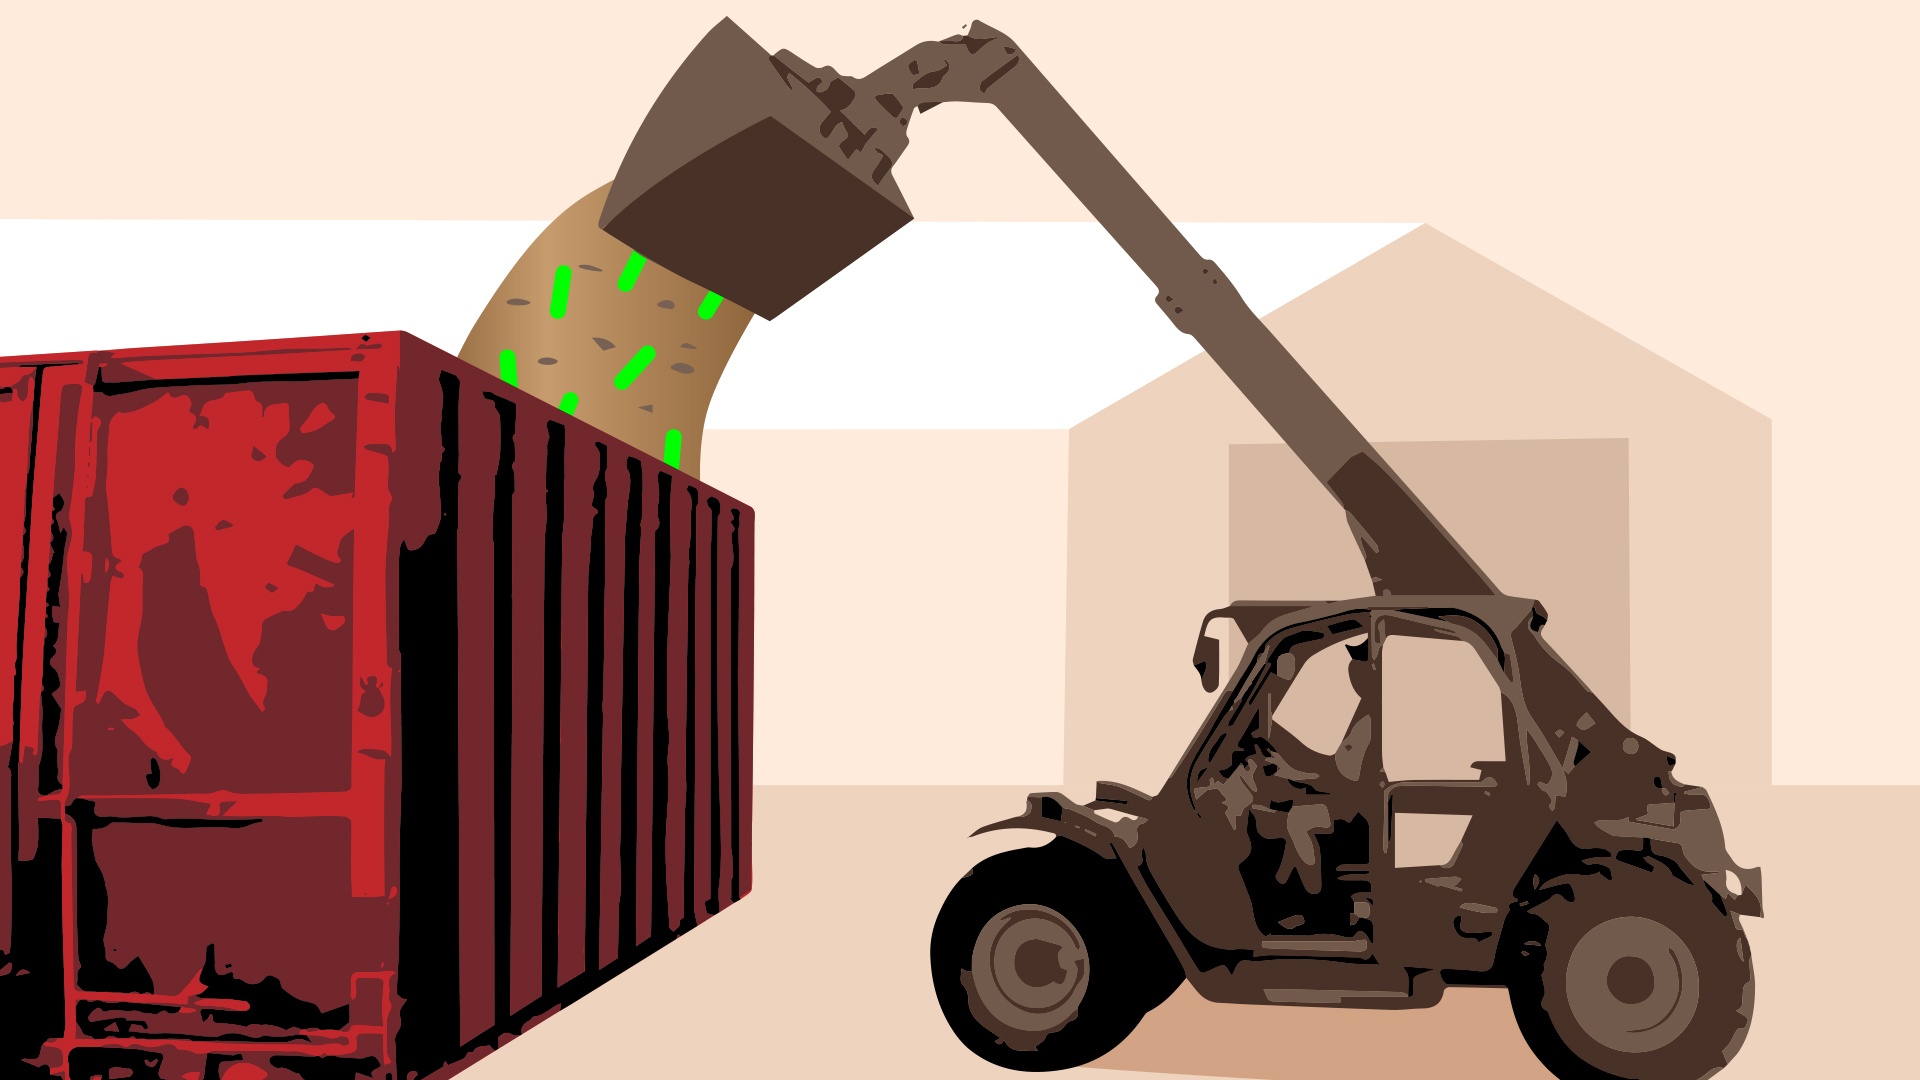 Illustration of tractor dumping feed into container 110821.